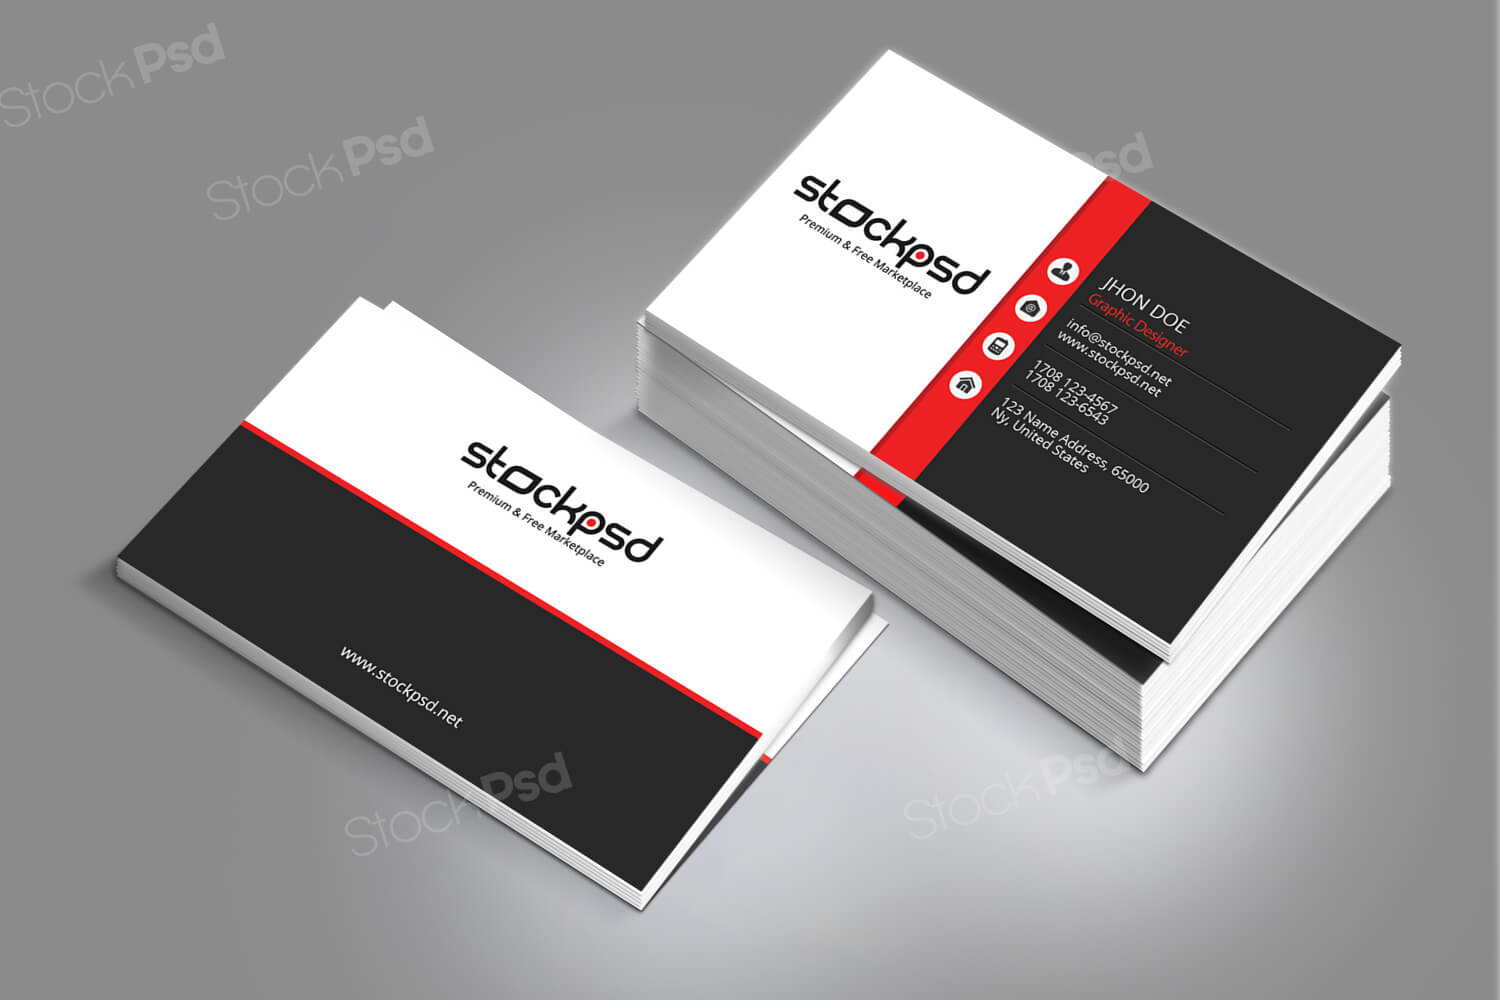 022 Template Ideas Free Photoshop Business Card Personal Psd Intended For Photoshop Business Card Template With Bleed